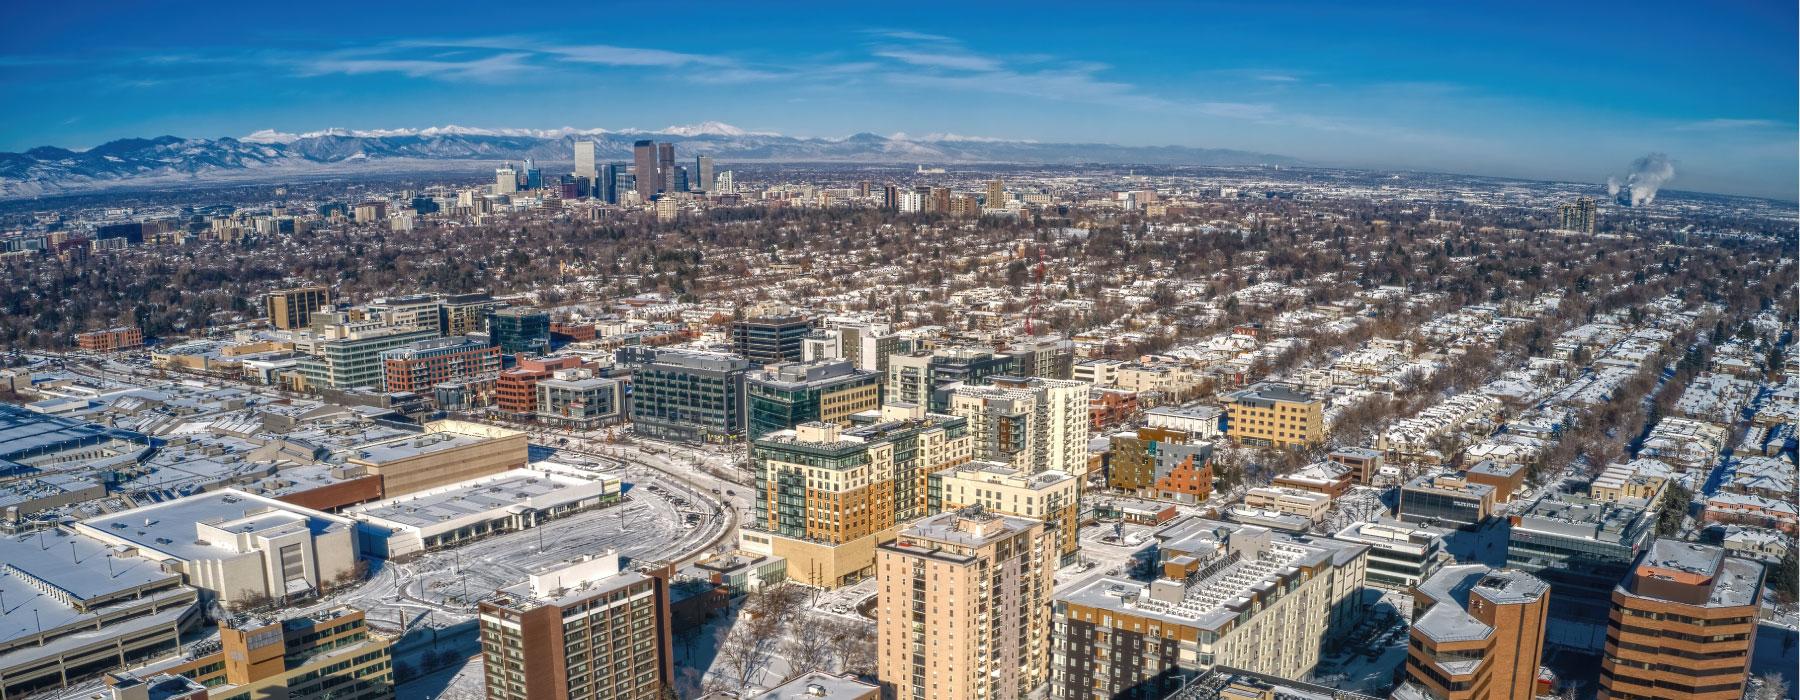 Aerial view of downtown Denver.